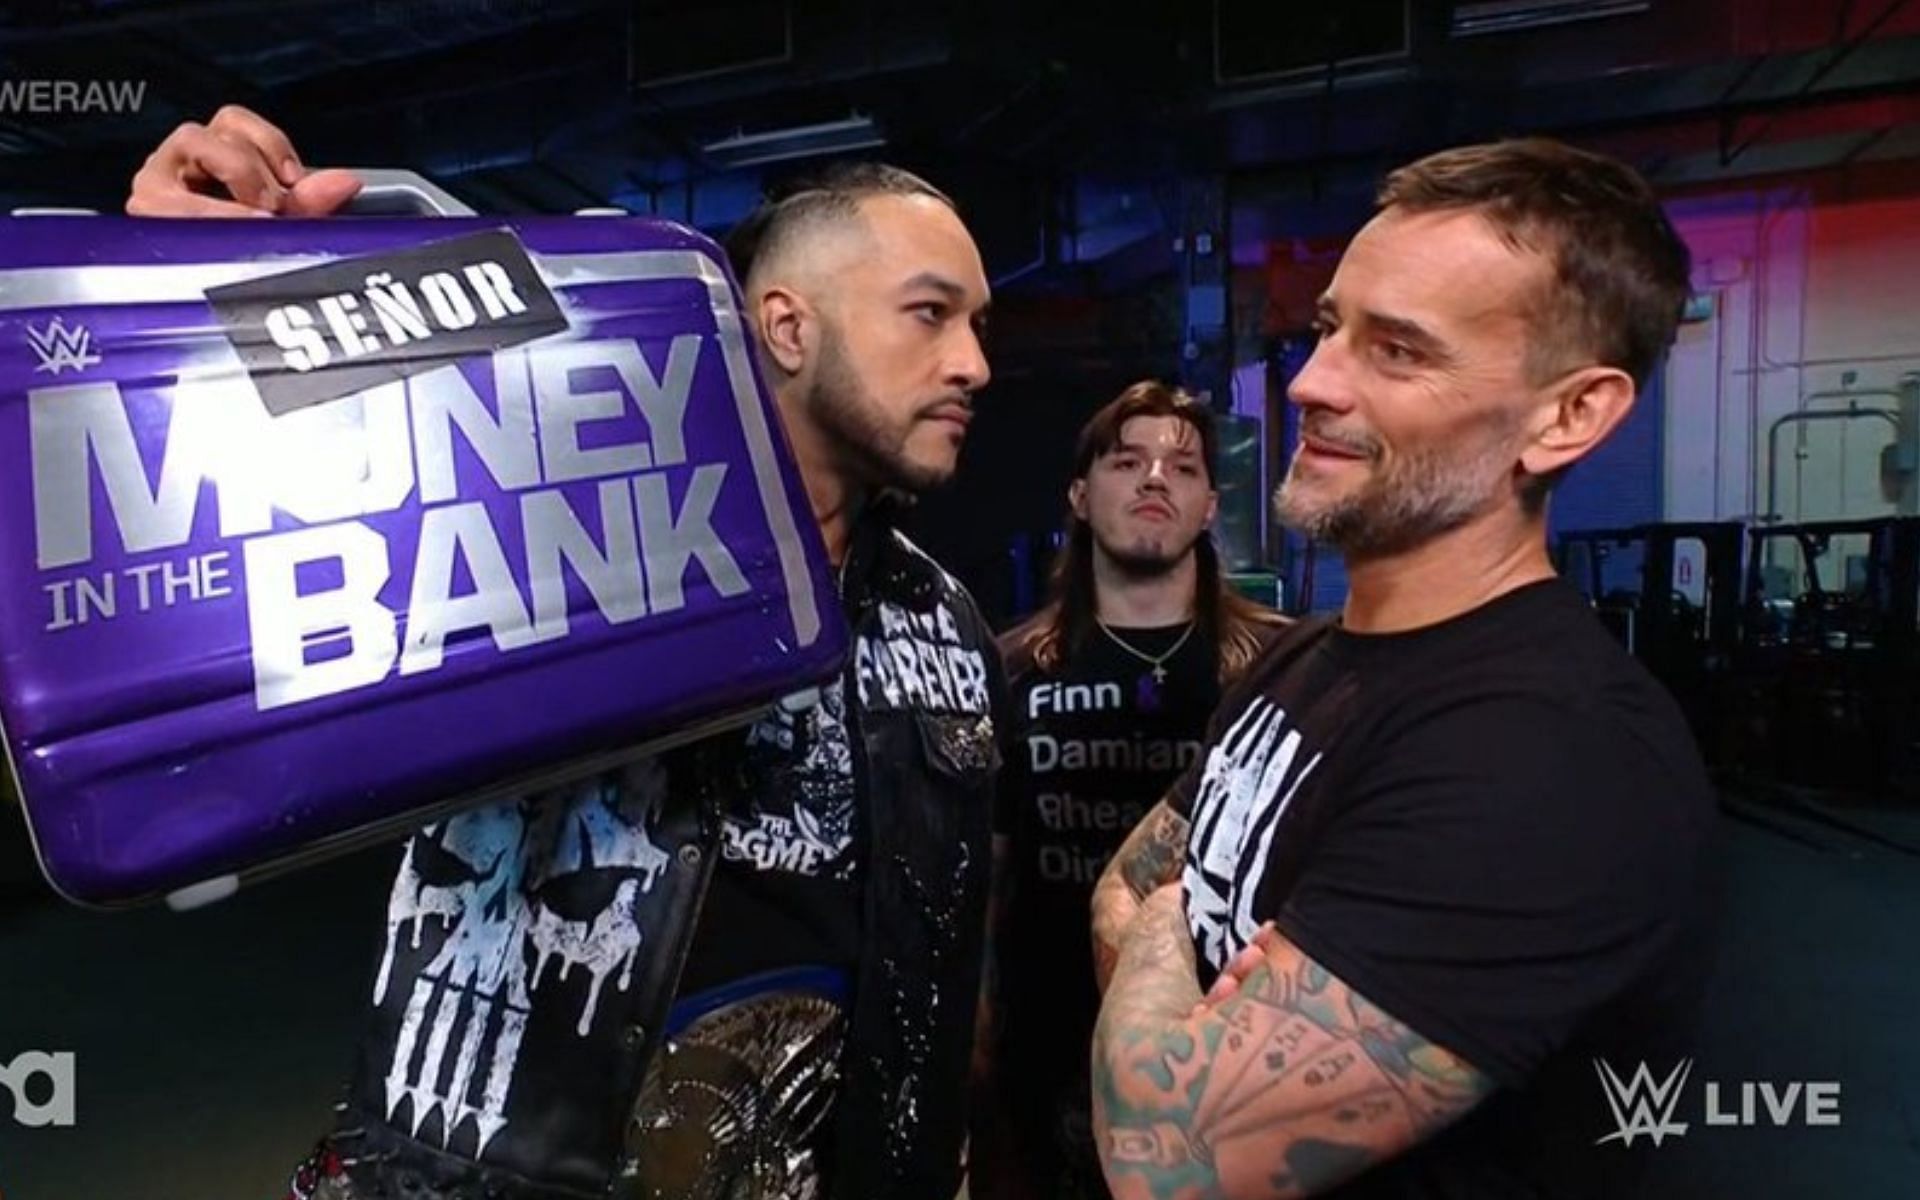 Punk is a 2-time Money in the Bank winner